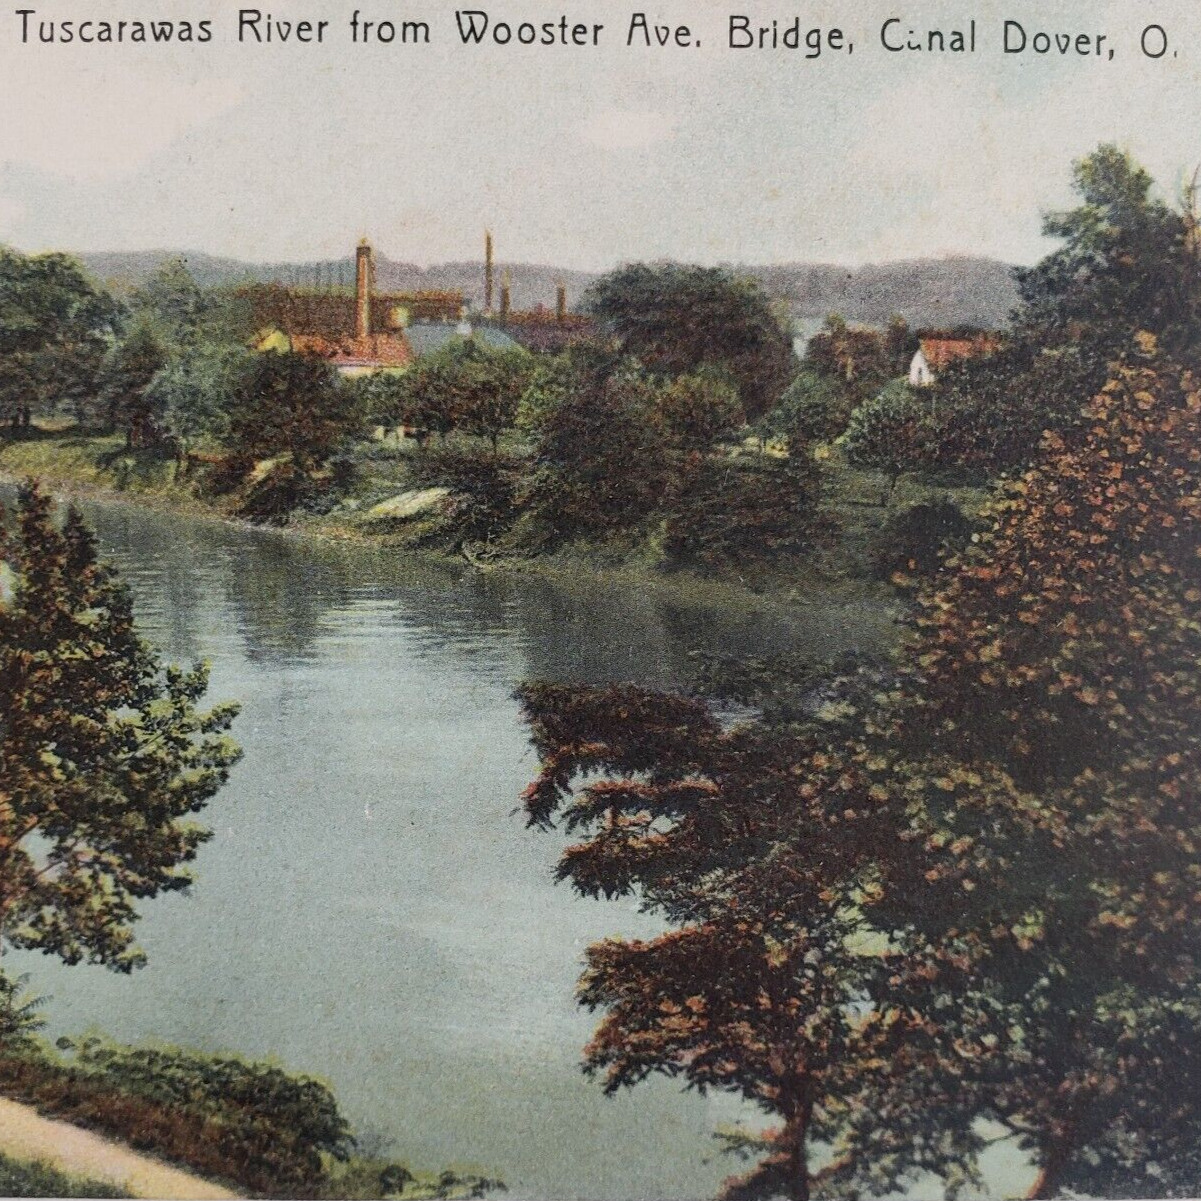 Canal Dover Ohio Panoramic Postcard c1907 Tuscarawas River Vintage Old Art H496